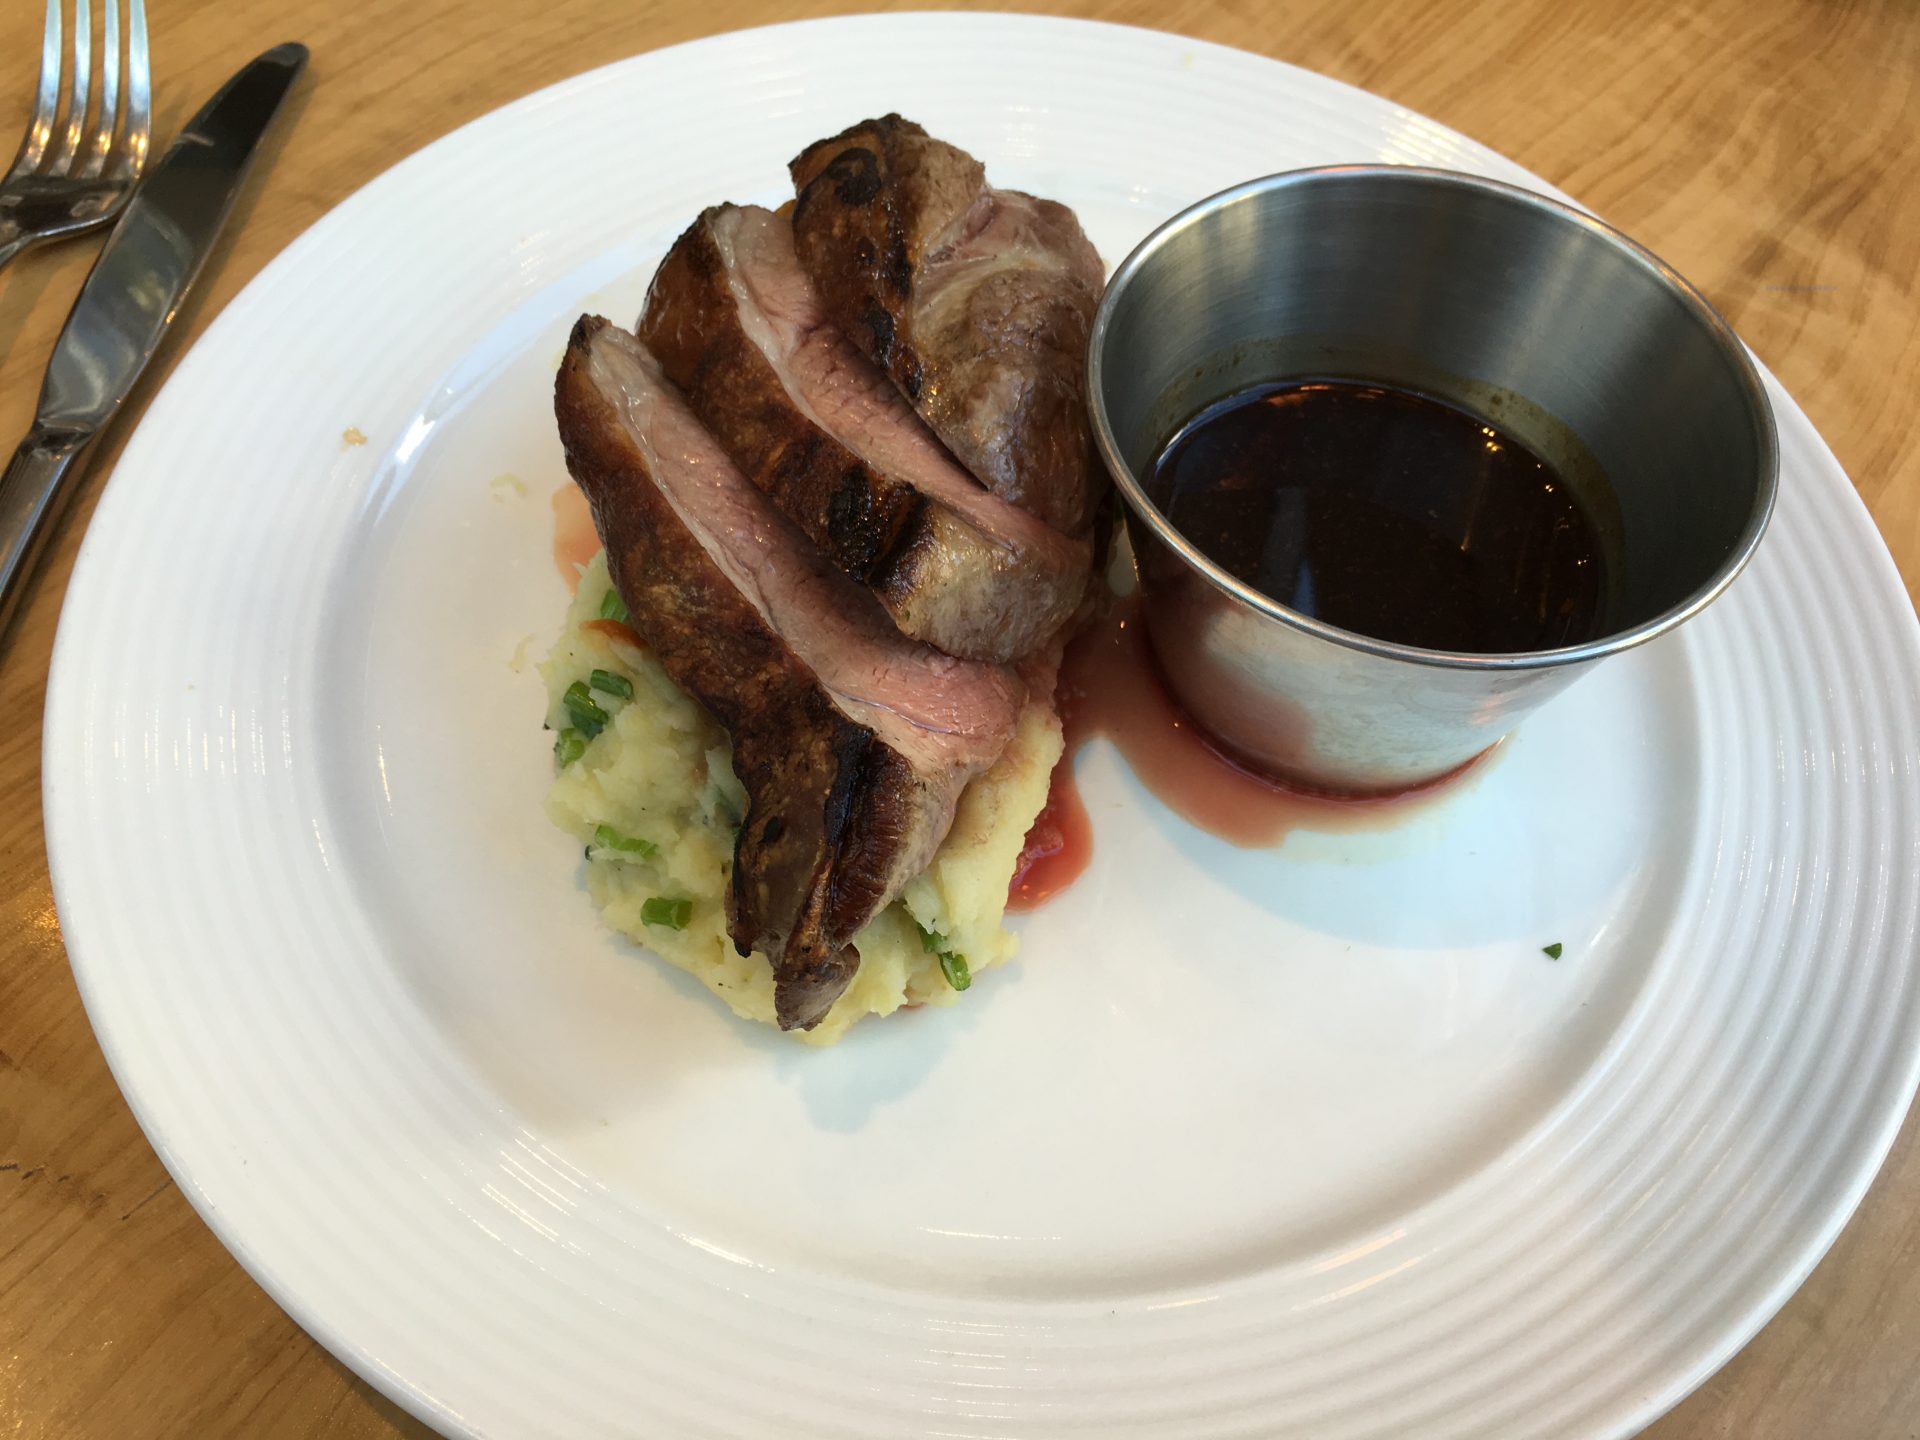 Roasted lamb with spring onion mash potato, whole roasted garlic cloves & a red wine jus